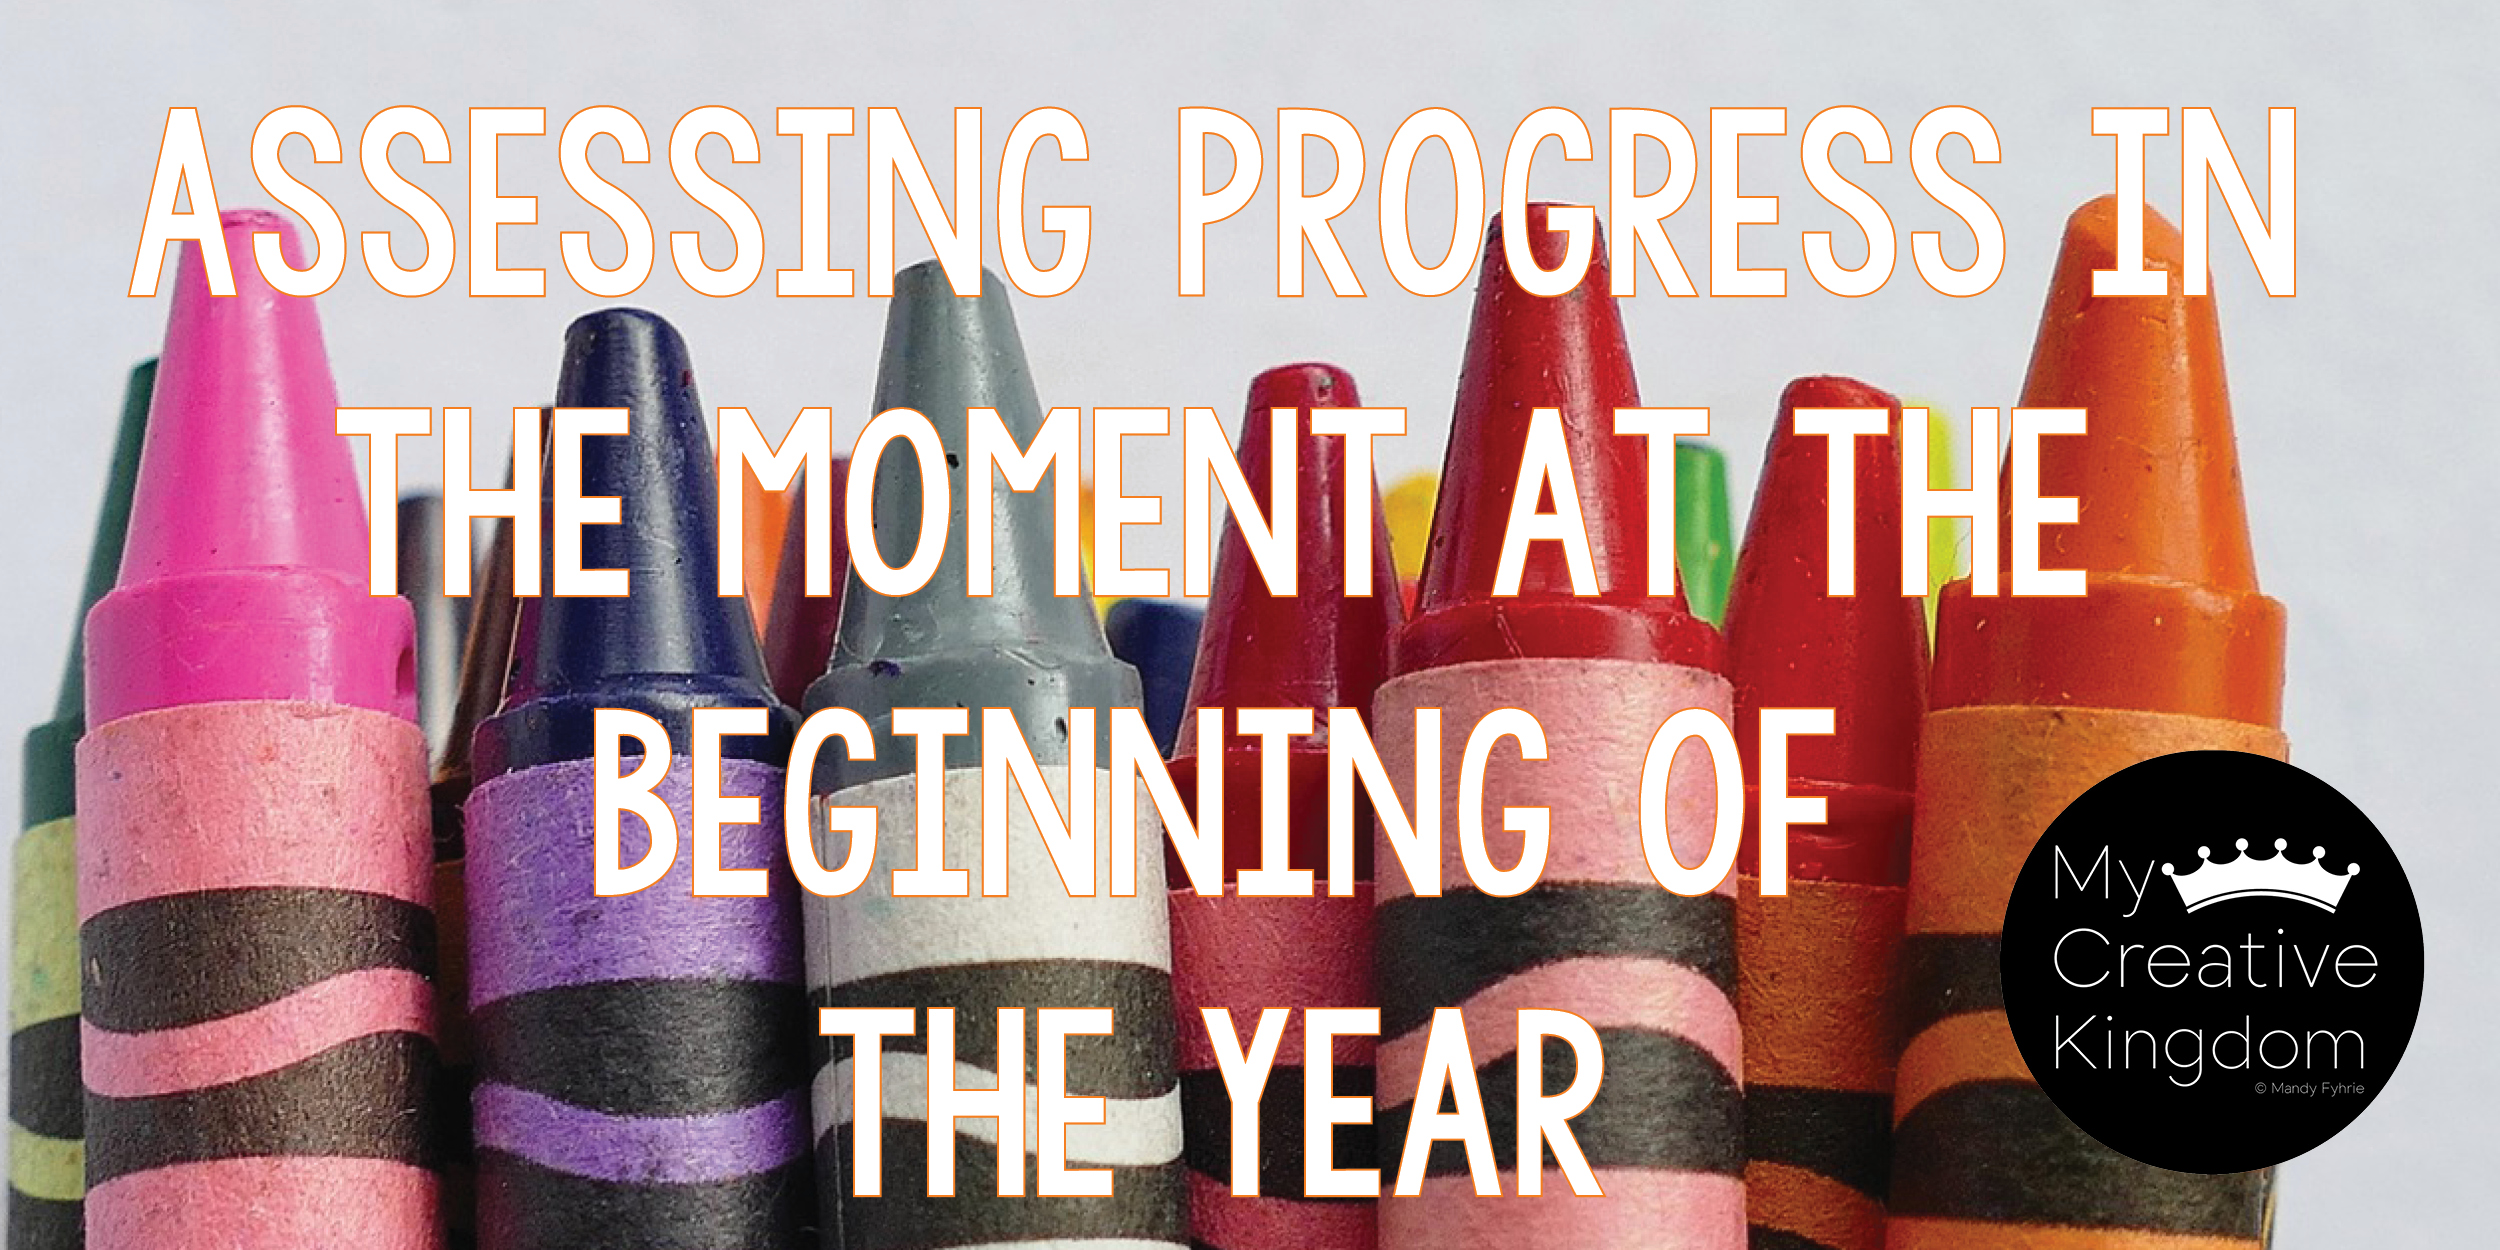 Assessing Progress in the Moment at the Beginning of the Year